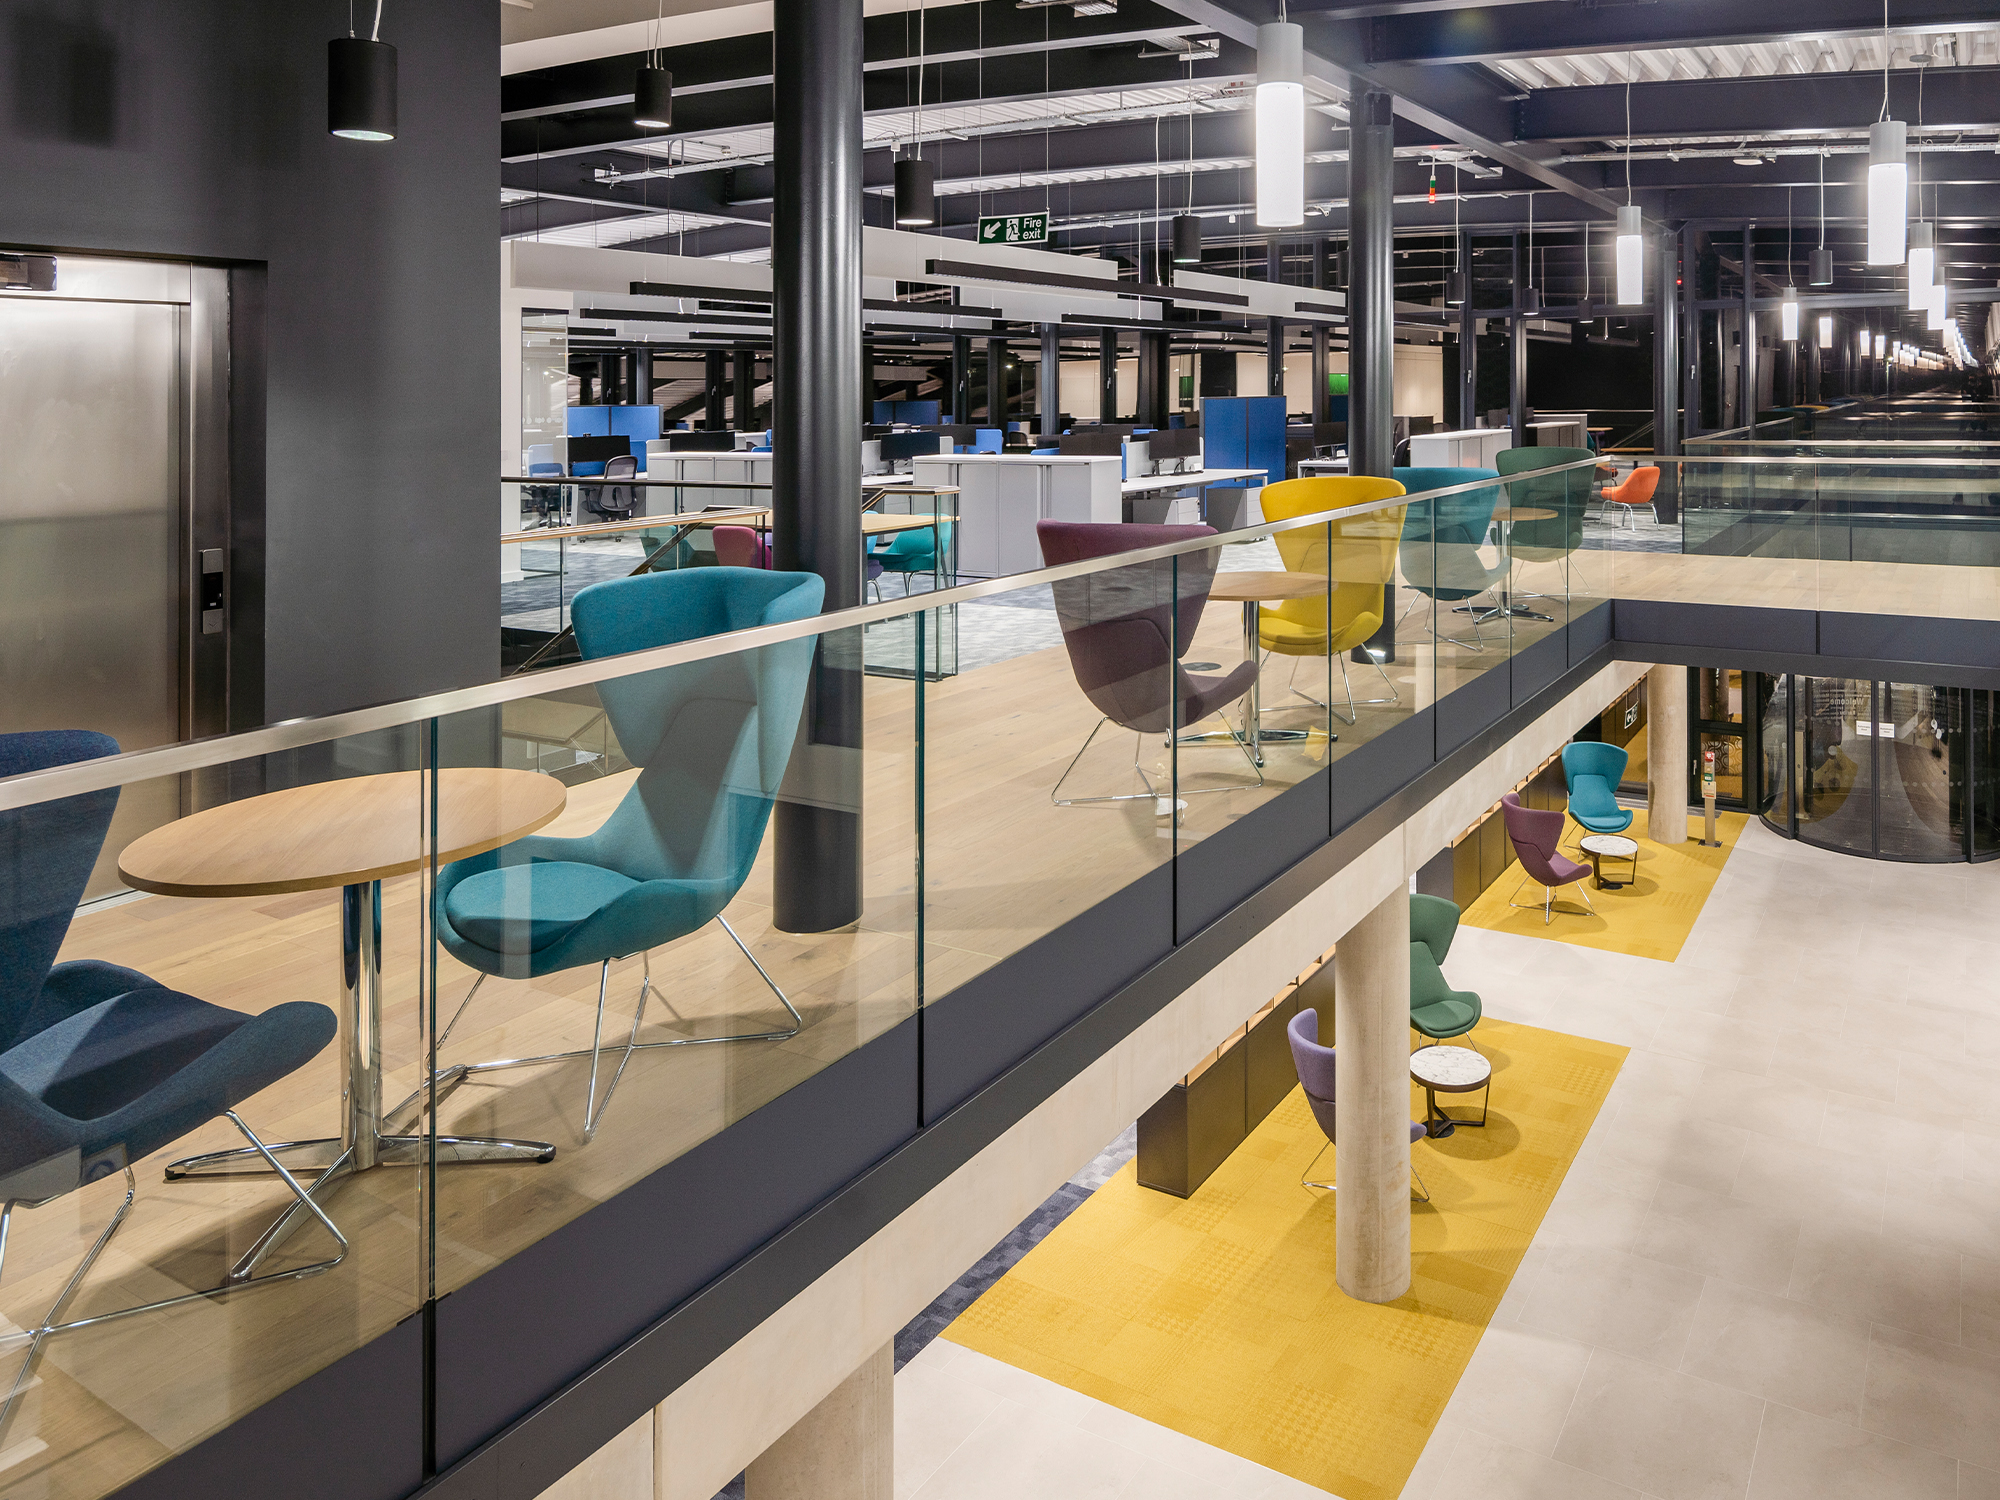 CABI HQ – featuring Ceech Plank, FSC Certified European Oak Engineered Wood Floor. CABI is a low energy highly sustainable building that embraces low carbon design principles, a bio-diverse landscape and lots of other passive sustainable design elements